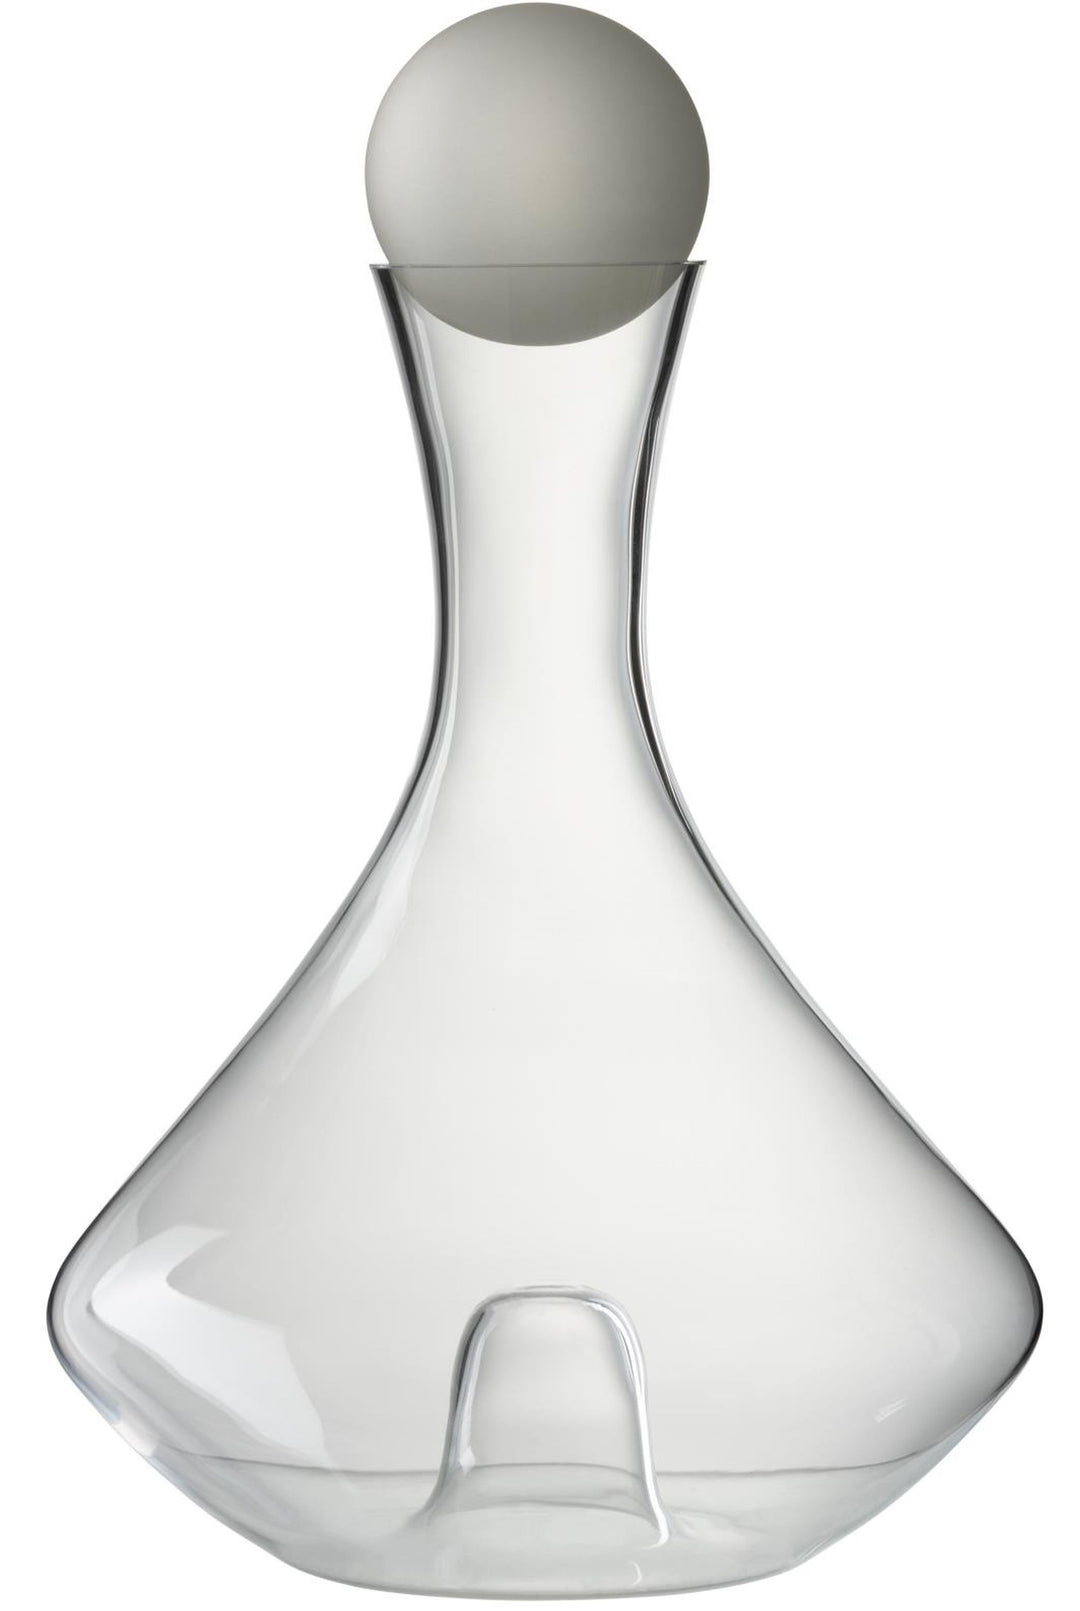 J-Line by Jolipa CARAFE MODERNE COURBEE VERRE